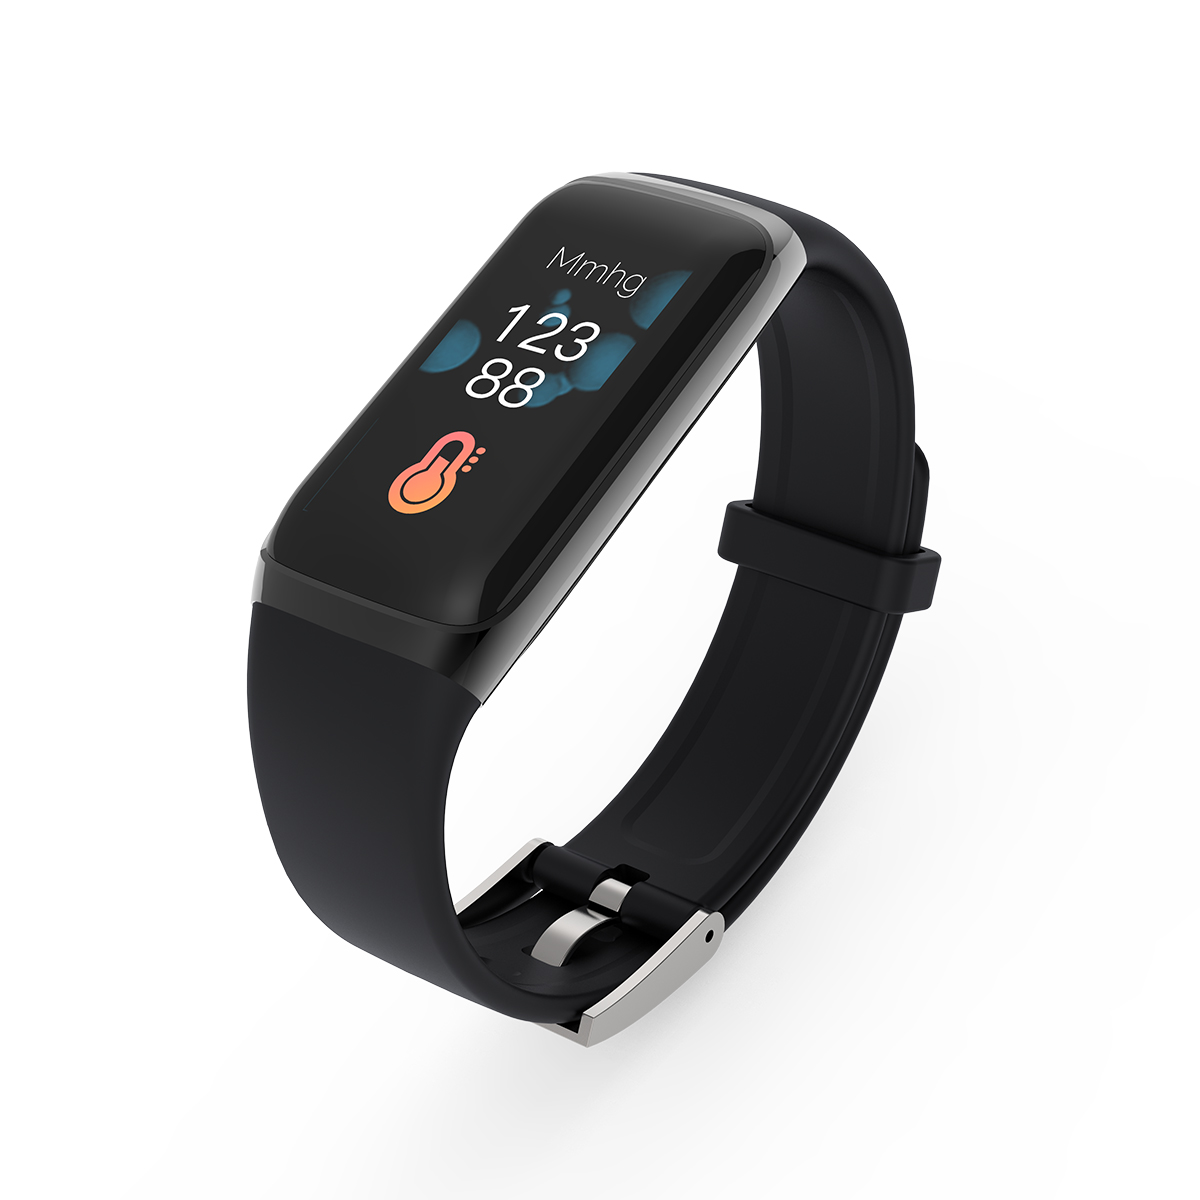 Find 0 96 inch TFT Color Screen Sports Heart Rate Blood Pressure Monitor Wristband Smart Watch for Sale on Gipsybee.com with cryptocurrencies